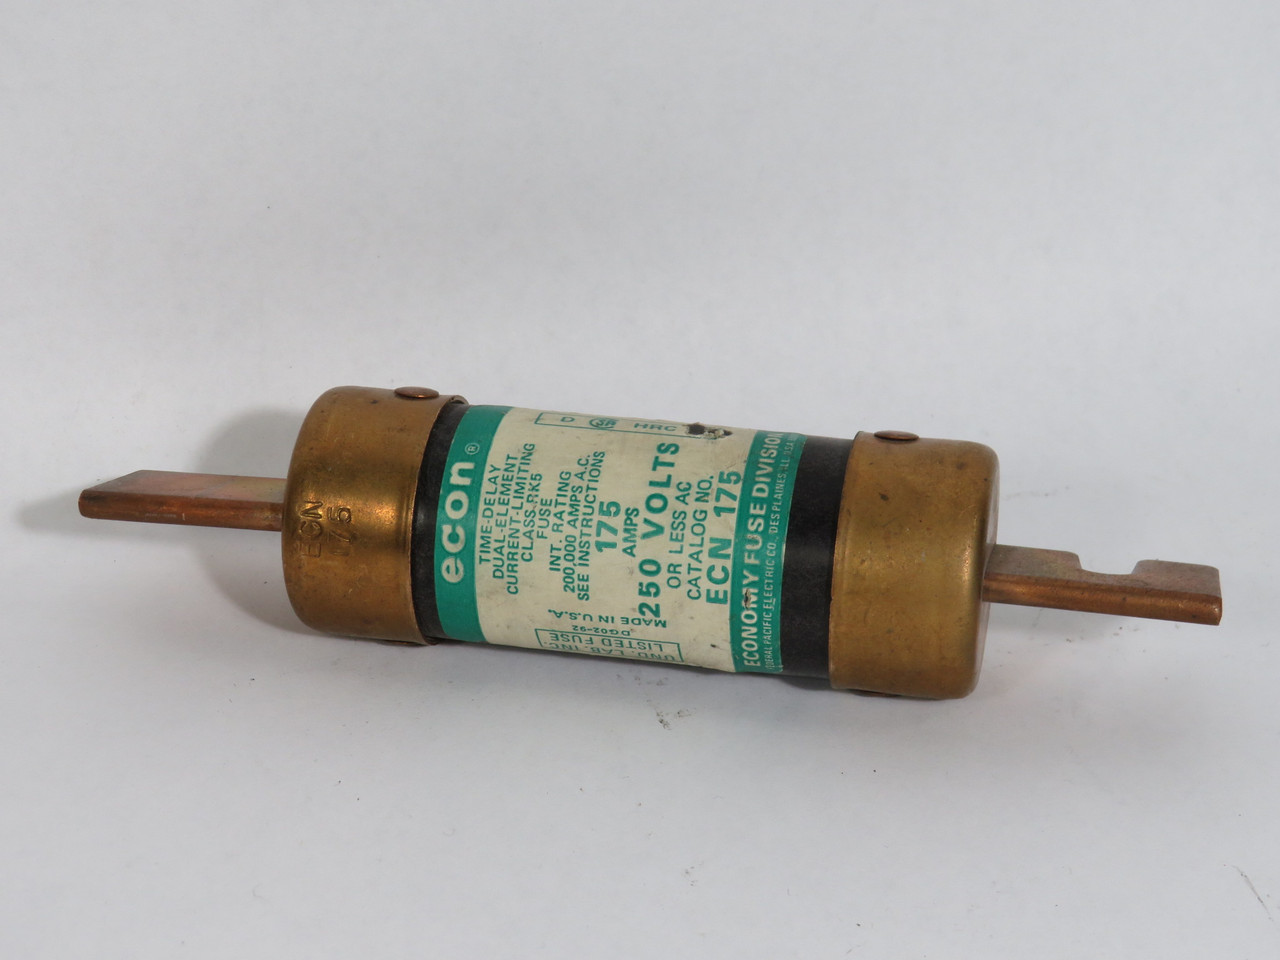 Econ ECN-175 Time Delay Dual Element Current Limiting Fuse 175A 250VAC USED